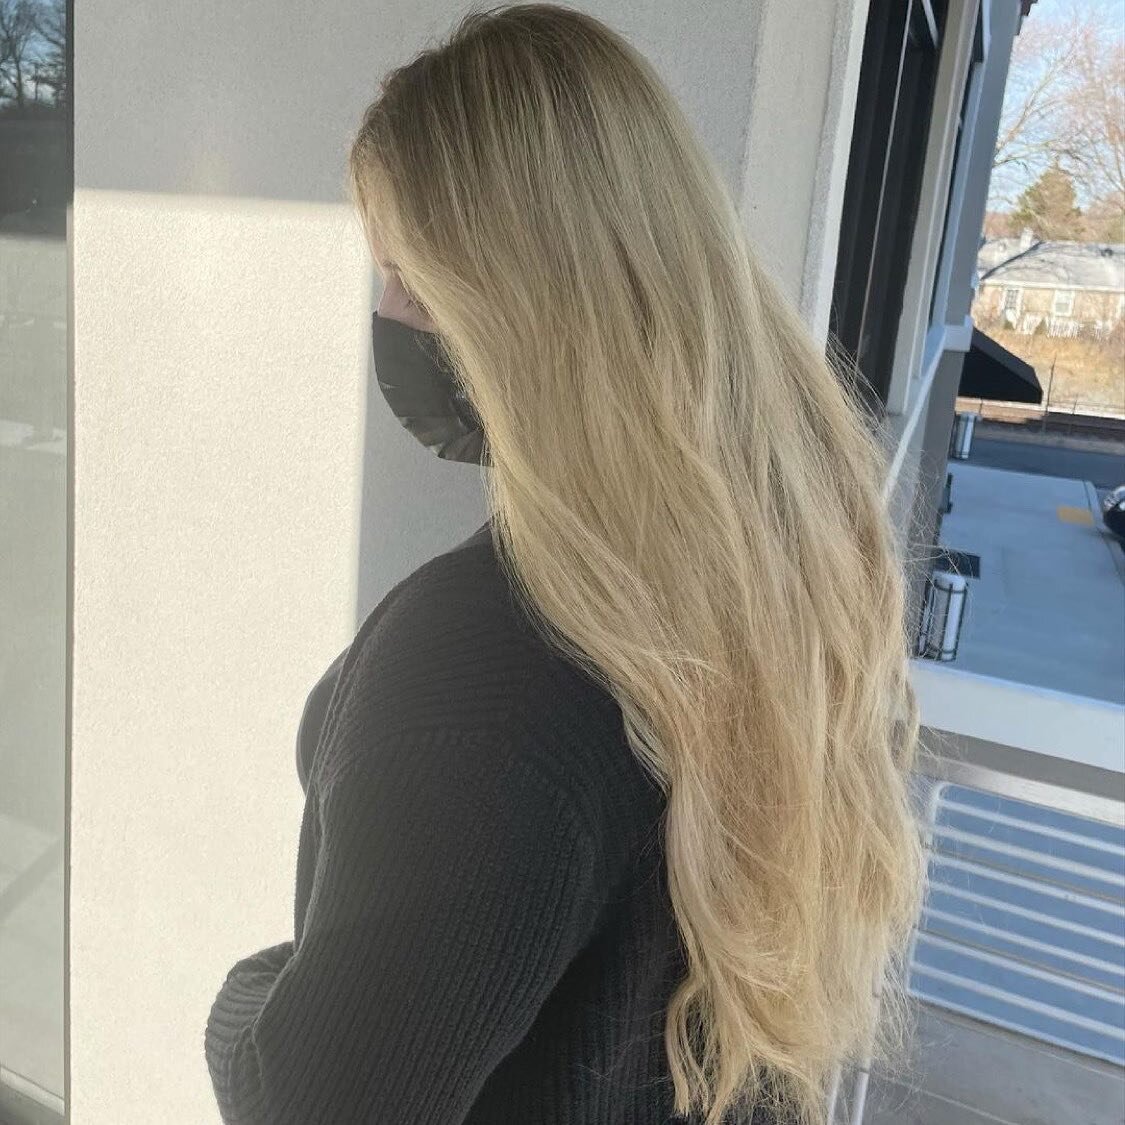 From @vivianhairerica
&bull;
Major blonde transformation. Swipe all the way for the before. At home bleach job &mdash;&gt; beautiful blonde @blackrosehairsalon #goldwellsilklift #goldwellapprovedus #goldwellcolor